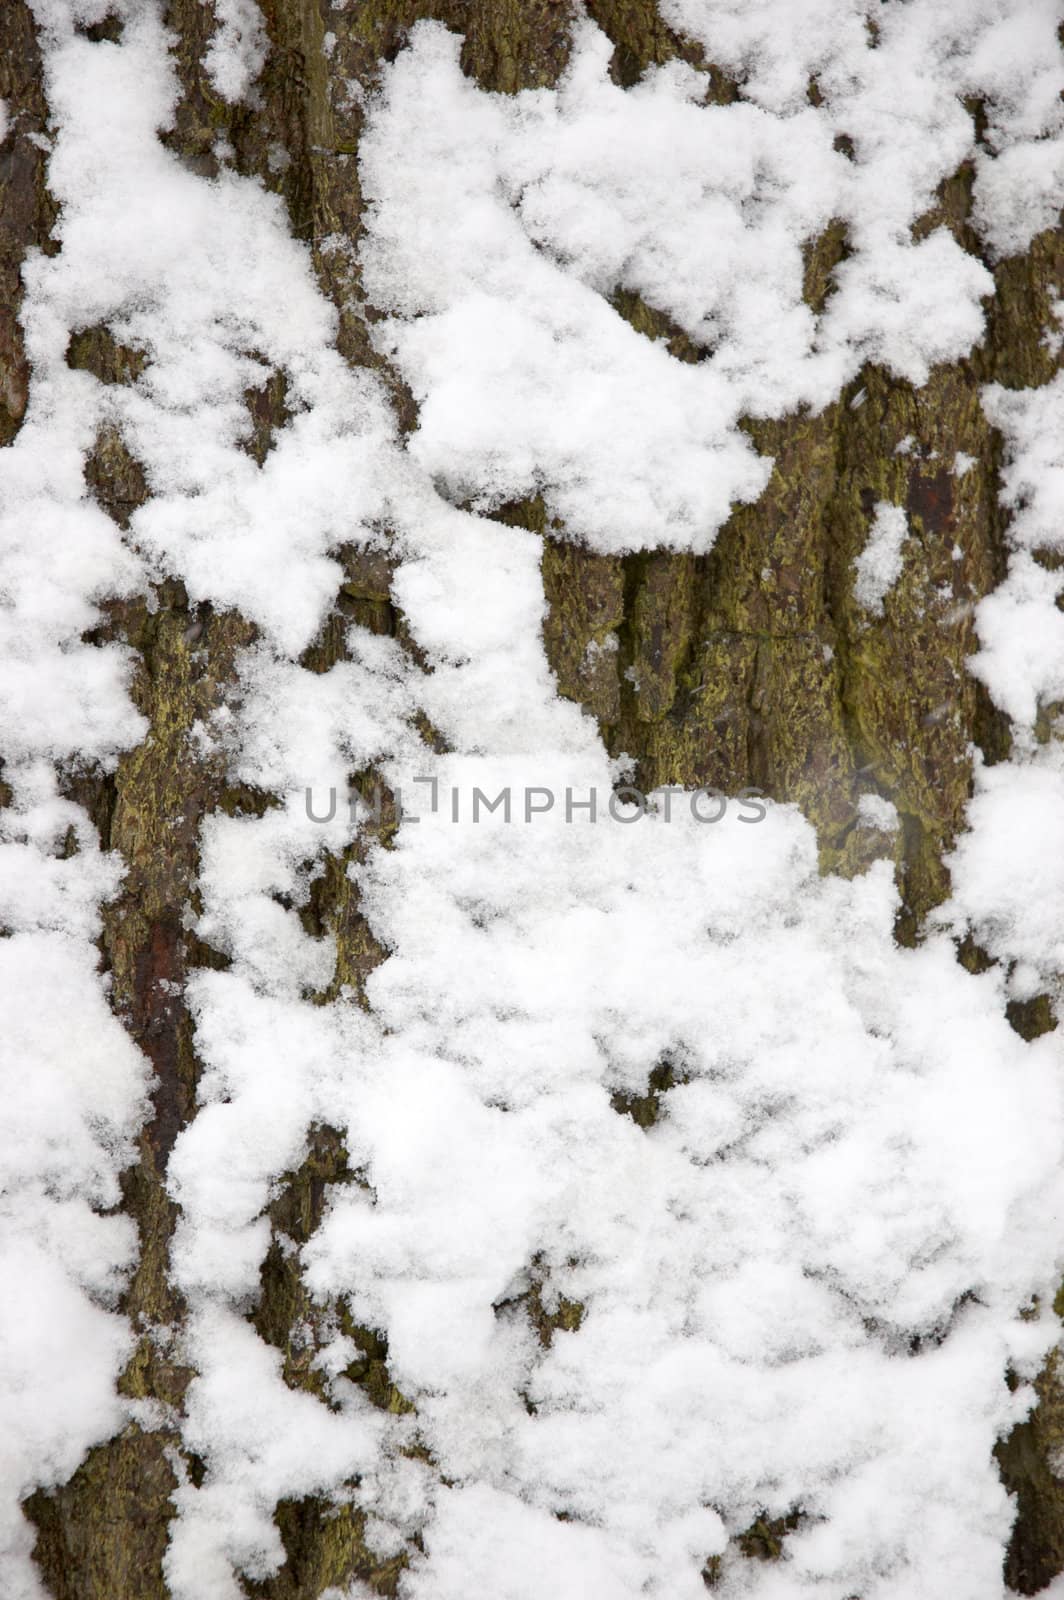 Snow on the trunk of an Oak tree